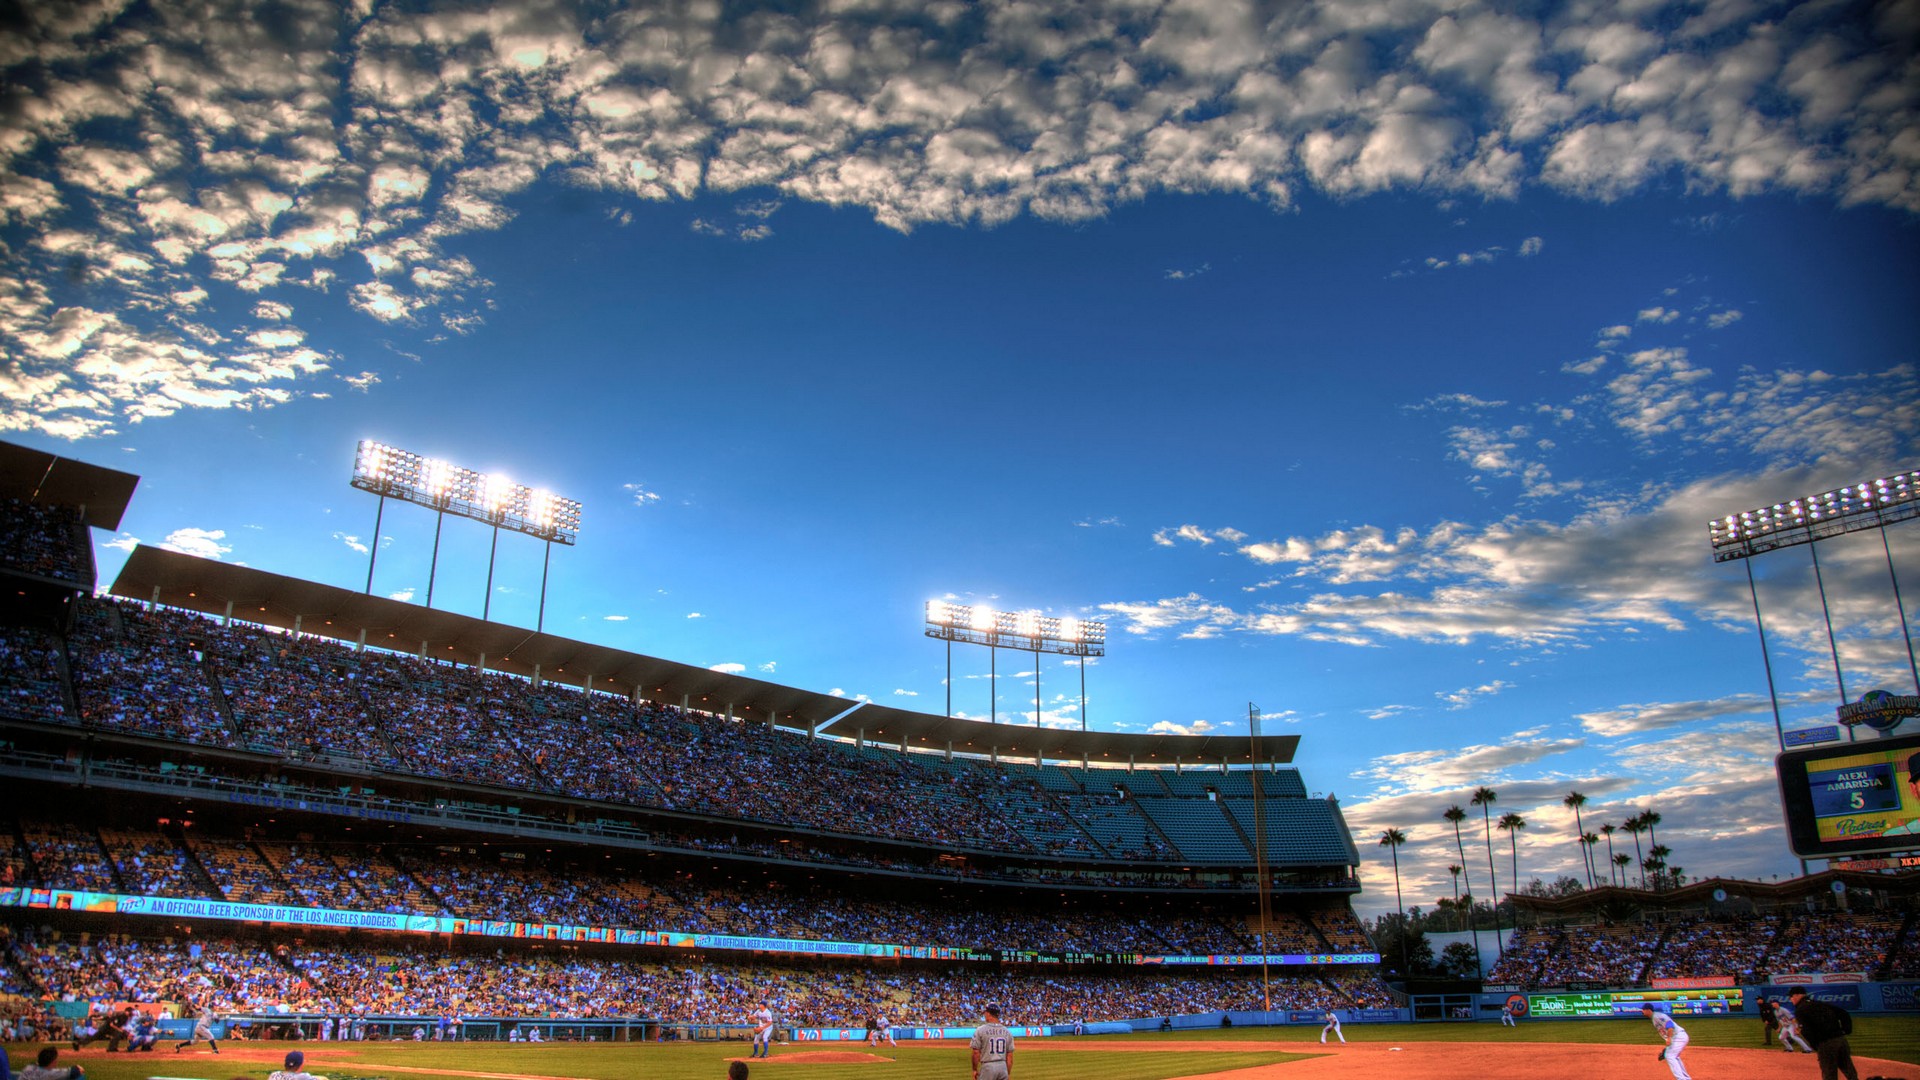 Los Angeles Dodgers MLB Wallpaper HD with high-resolution 1920x1080 pixel. You can use this wallpaper for Mac Desktop Wallpaper, Laptop Screensavers, Android Wallpapers, Tablet or iPhone Home Screen and another mobile phone device